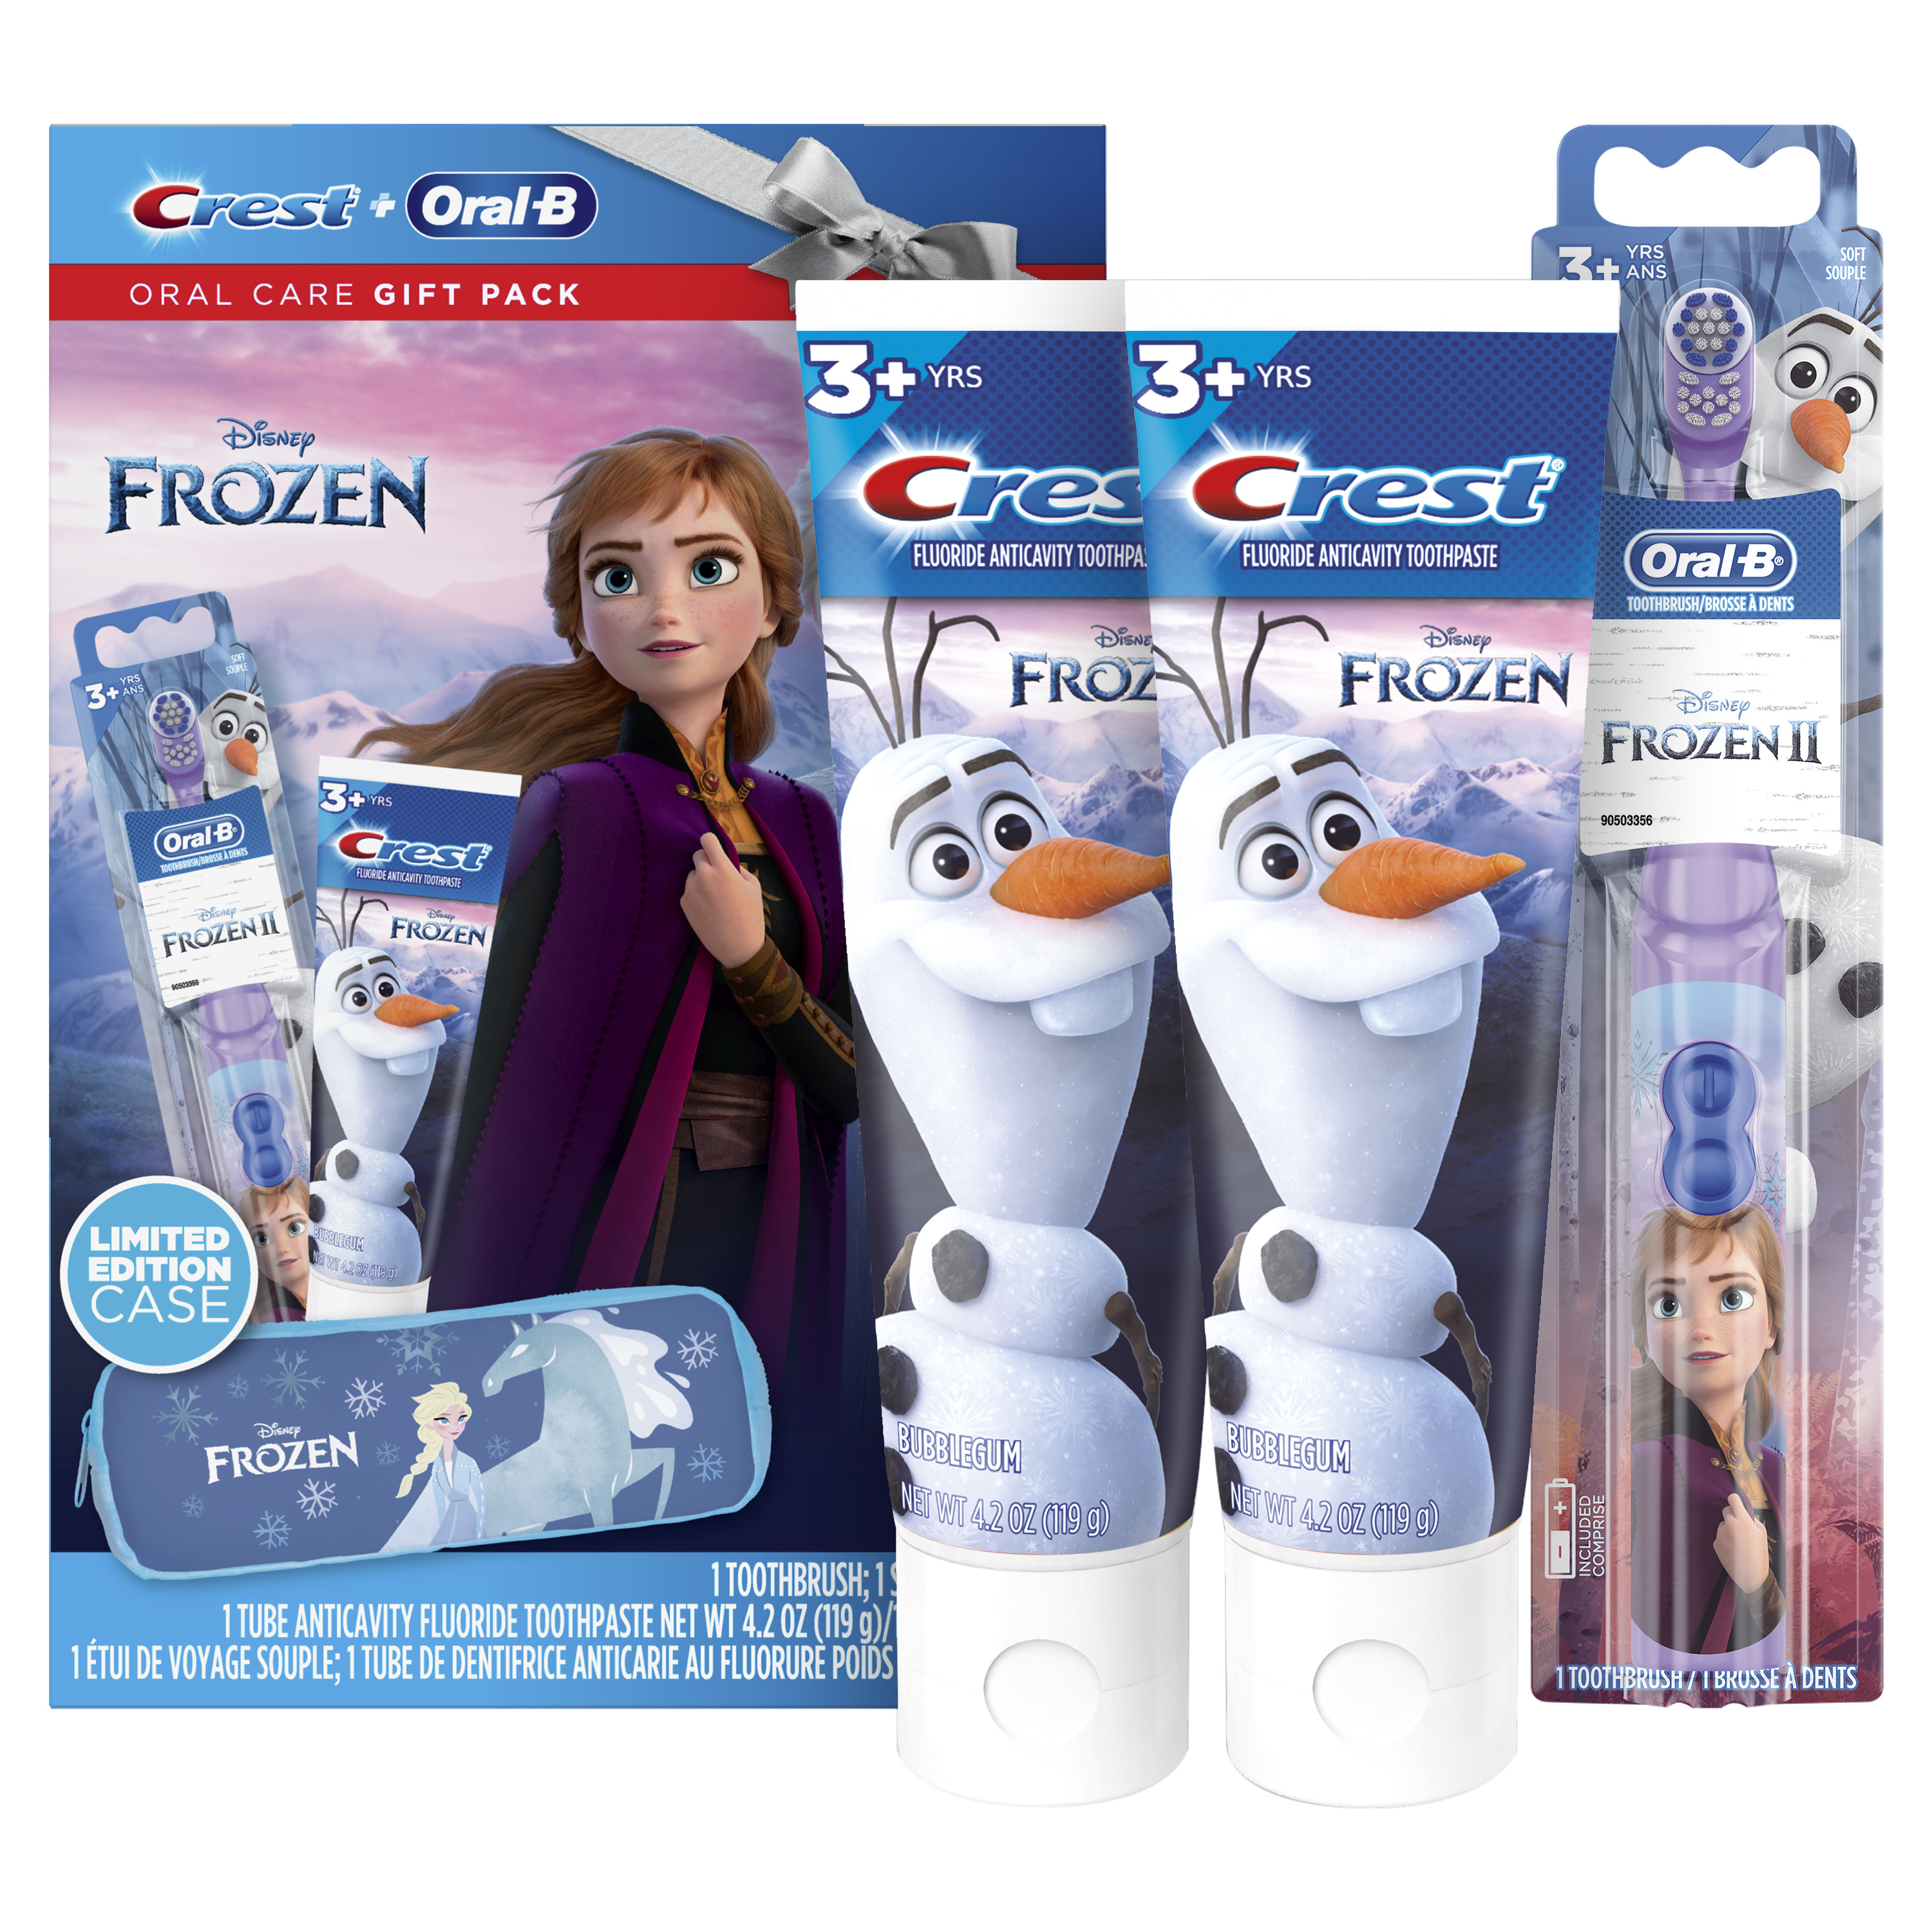 (25% Value) Crest & Oral-B Kids Disney's Frozen Holiday Pack Gift Set with Battery Toothbrush and 4.2 oz Toothpaste - image 1 of 11